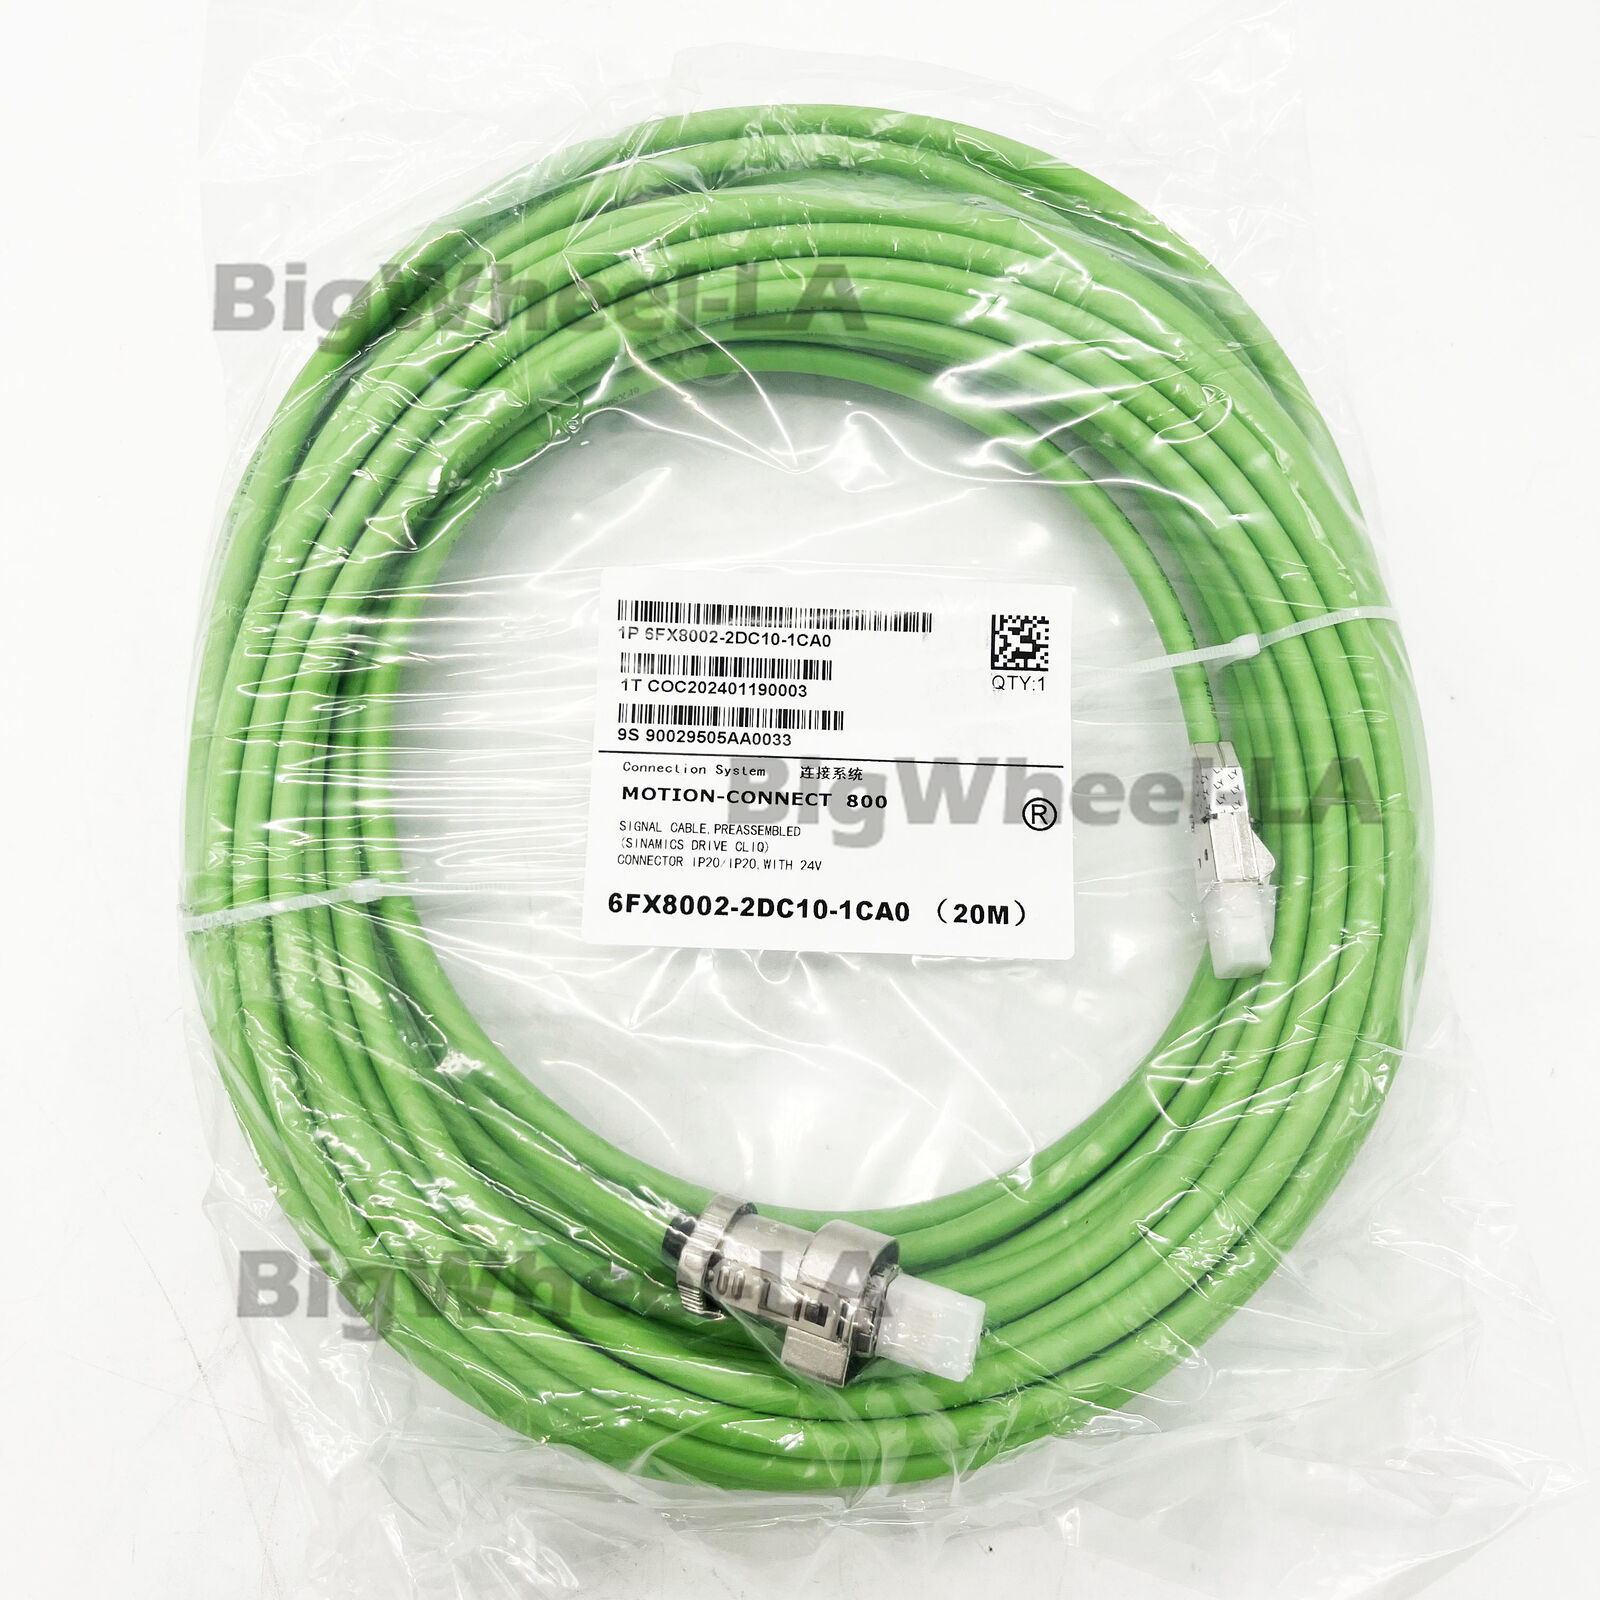 NEW In Box SIEMENS Encoder Cable 20M 6FX8002-2DC10-1CA0